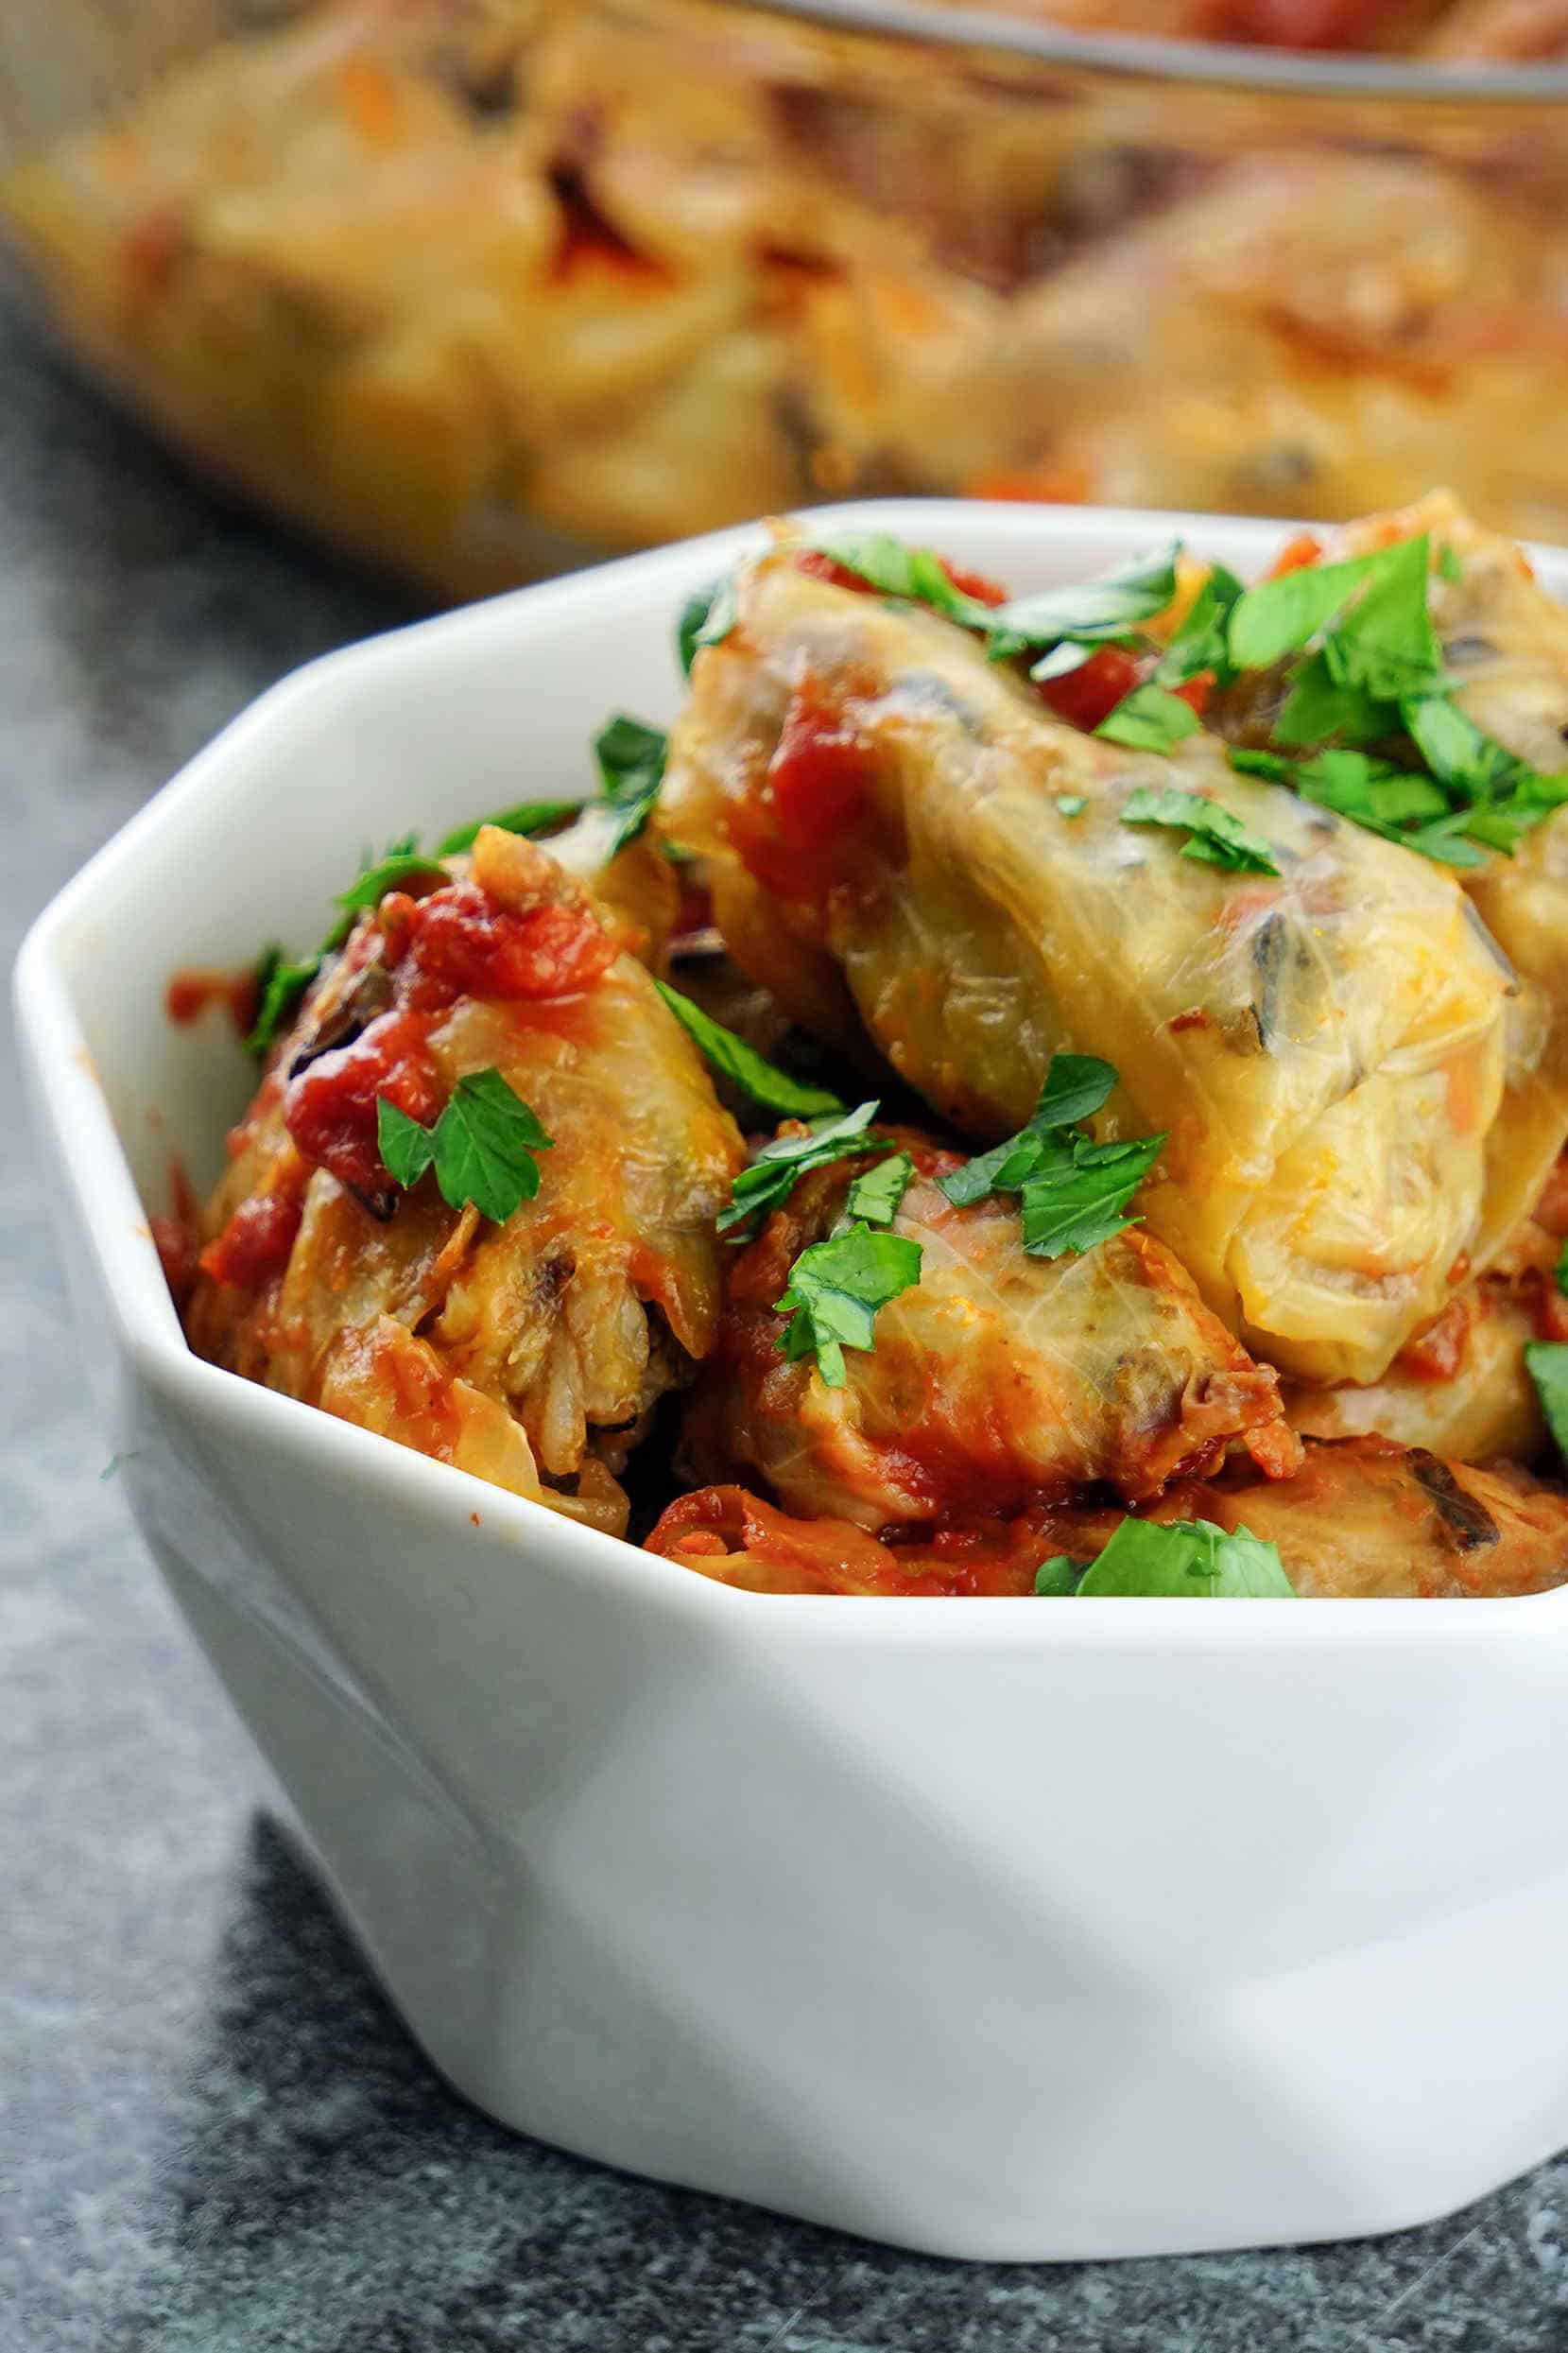 These healthy stuffed cabbage rolls make a delicious gluten free, dairy free, clean eating dinner or lunch. The cabbage leaves are stuffed with a mix of wild rice and basmati rice, seasoned grass fed ground beef, caramelized veggies and baked in the oven until moist and tender.